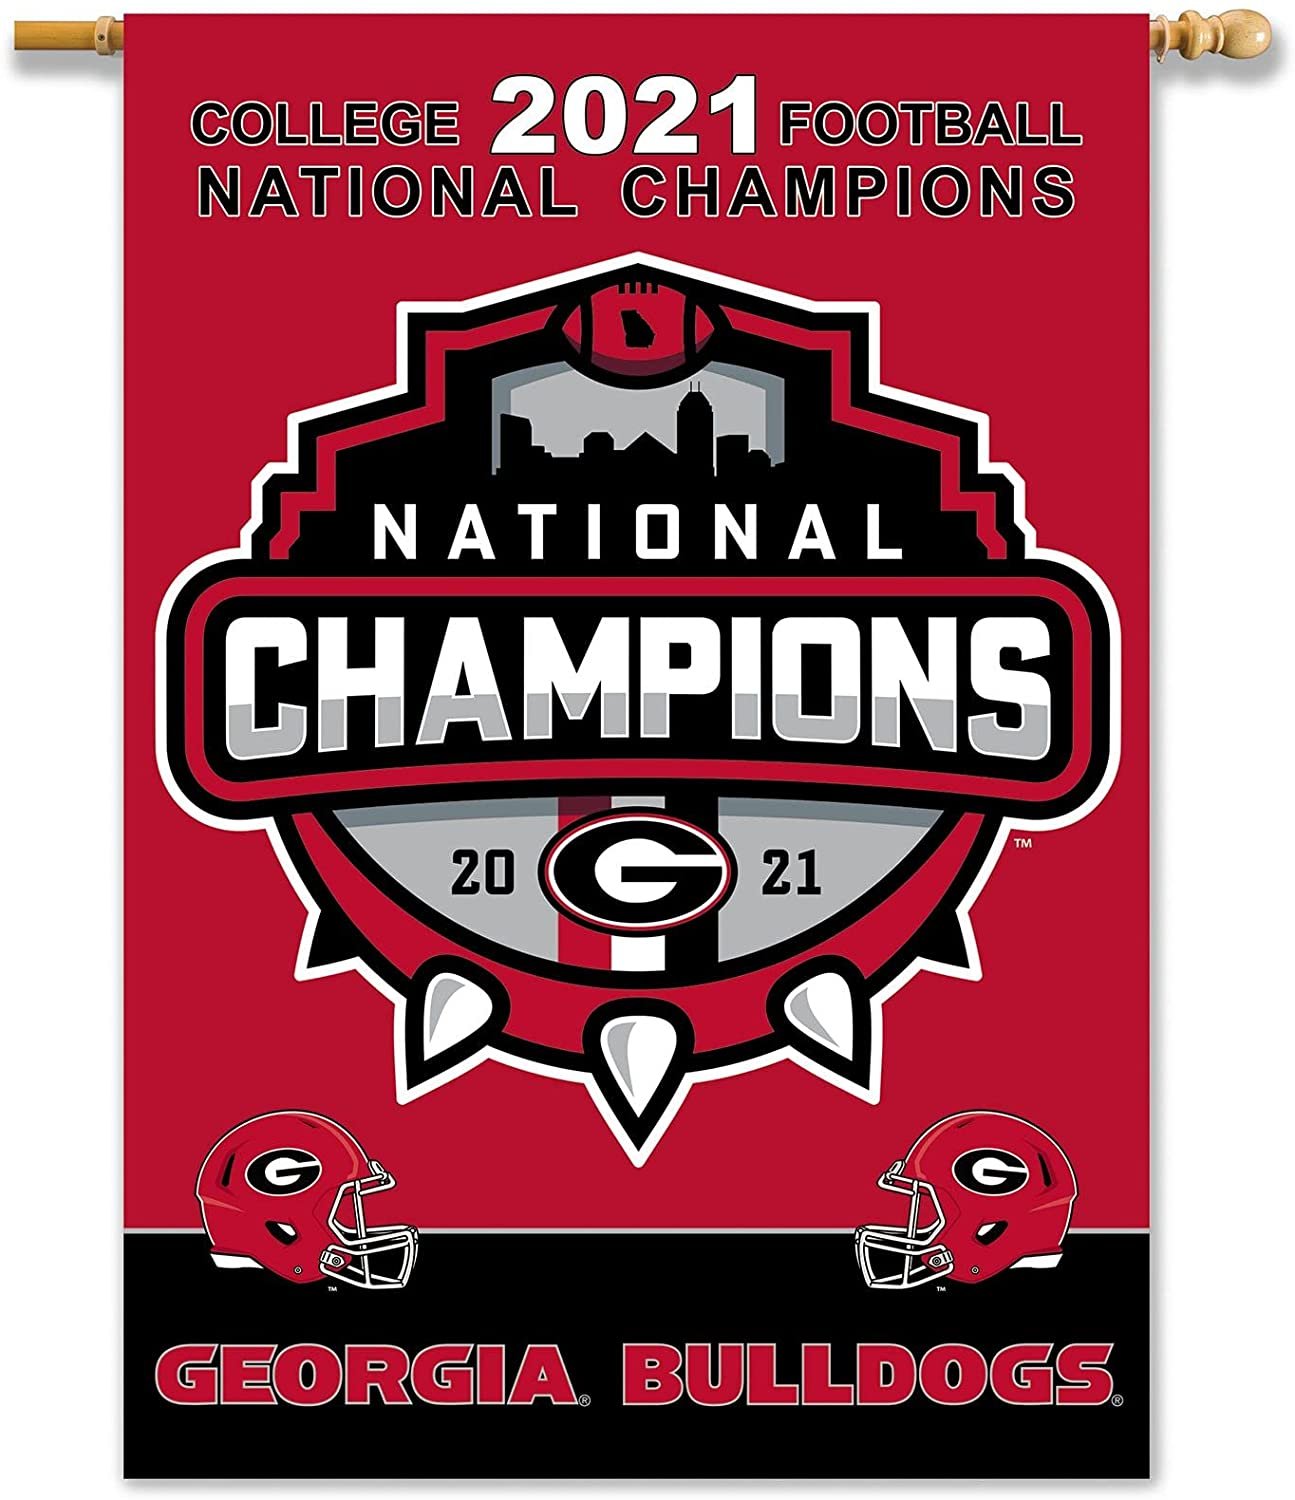 BSI PRODUCTS, INC. - Georgia Bulldogs 2021 National Champions 2-Sided 28"x40" Banner w/ Pole Sleeve - UGA Football Pride - High Durability for Indoor and Outdoor Use - Great Gift Idea